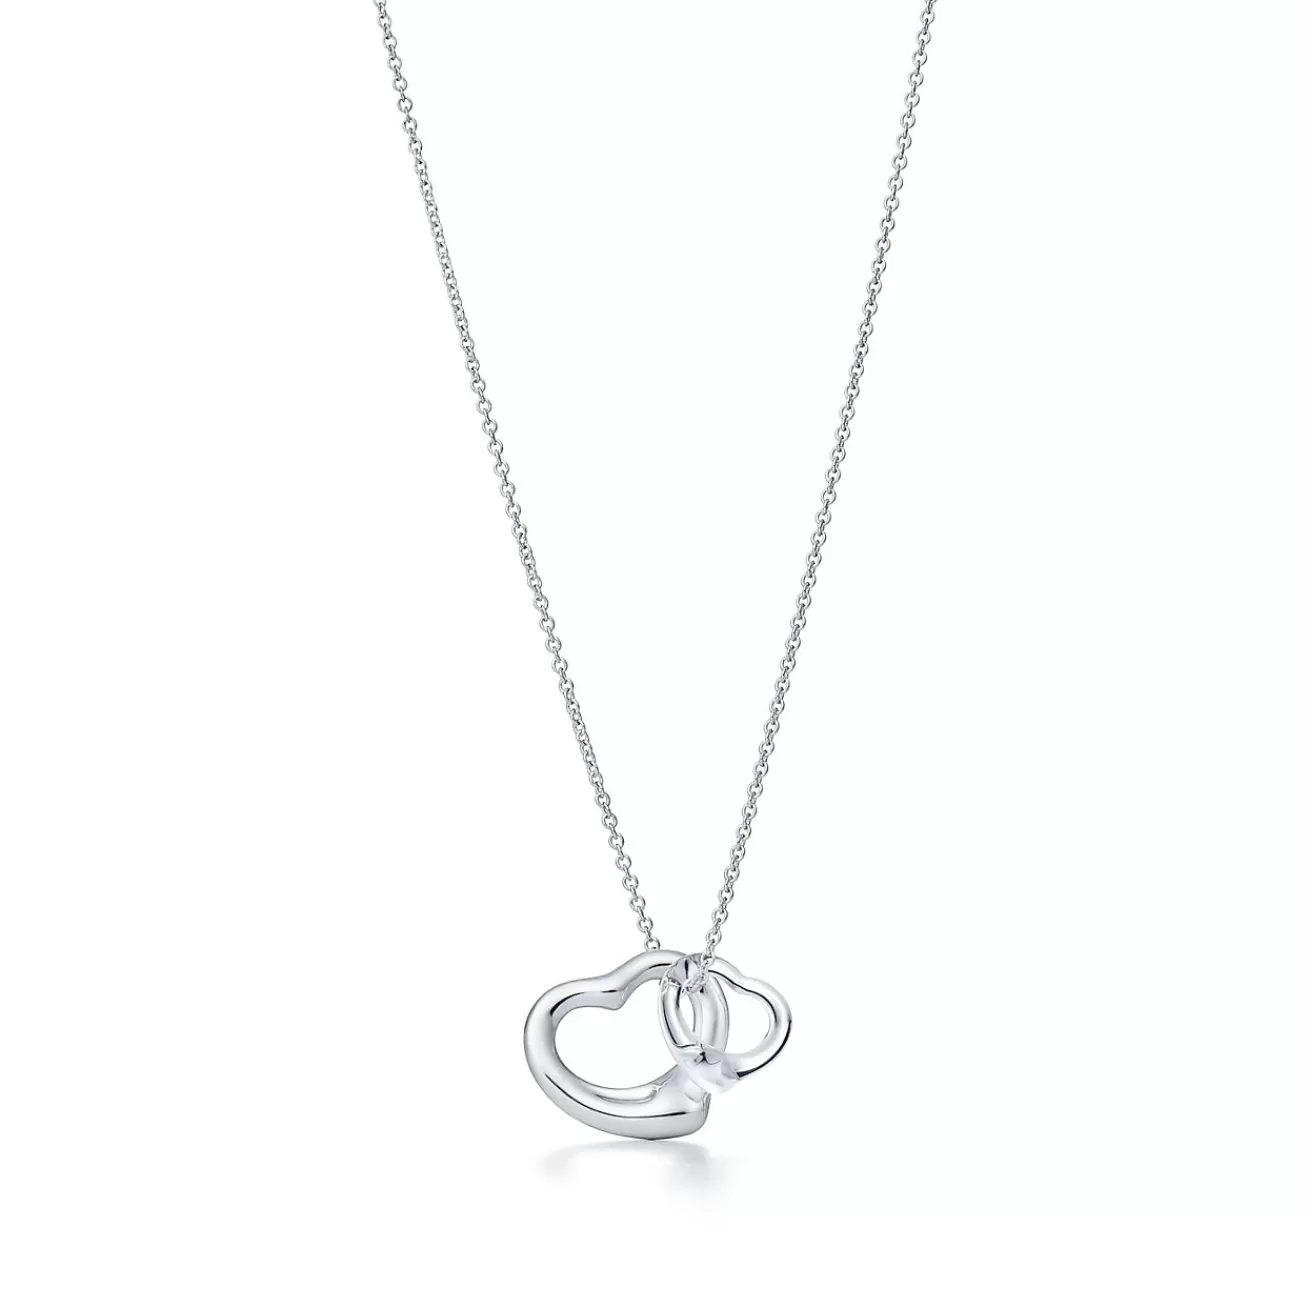 Tiffany & Co. Elsa Peretti® Open Heart pendant of sterling silver and rock crystal. | ^ Necklaces & Pendants | Gifts for Her